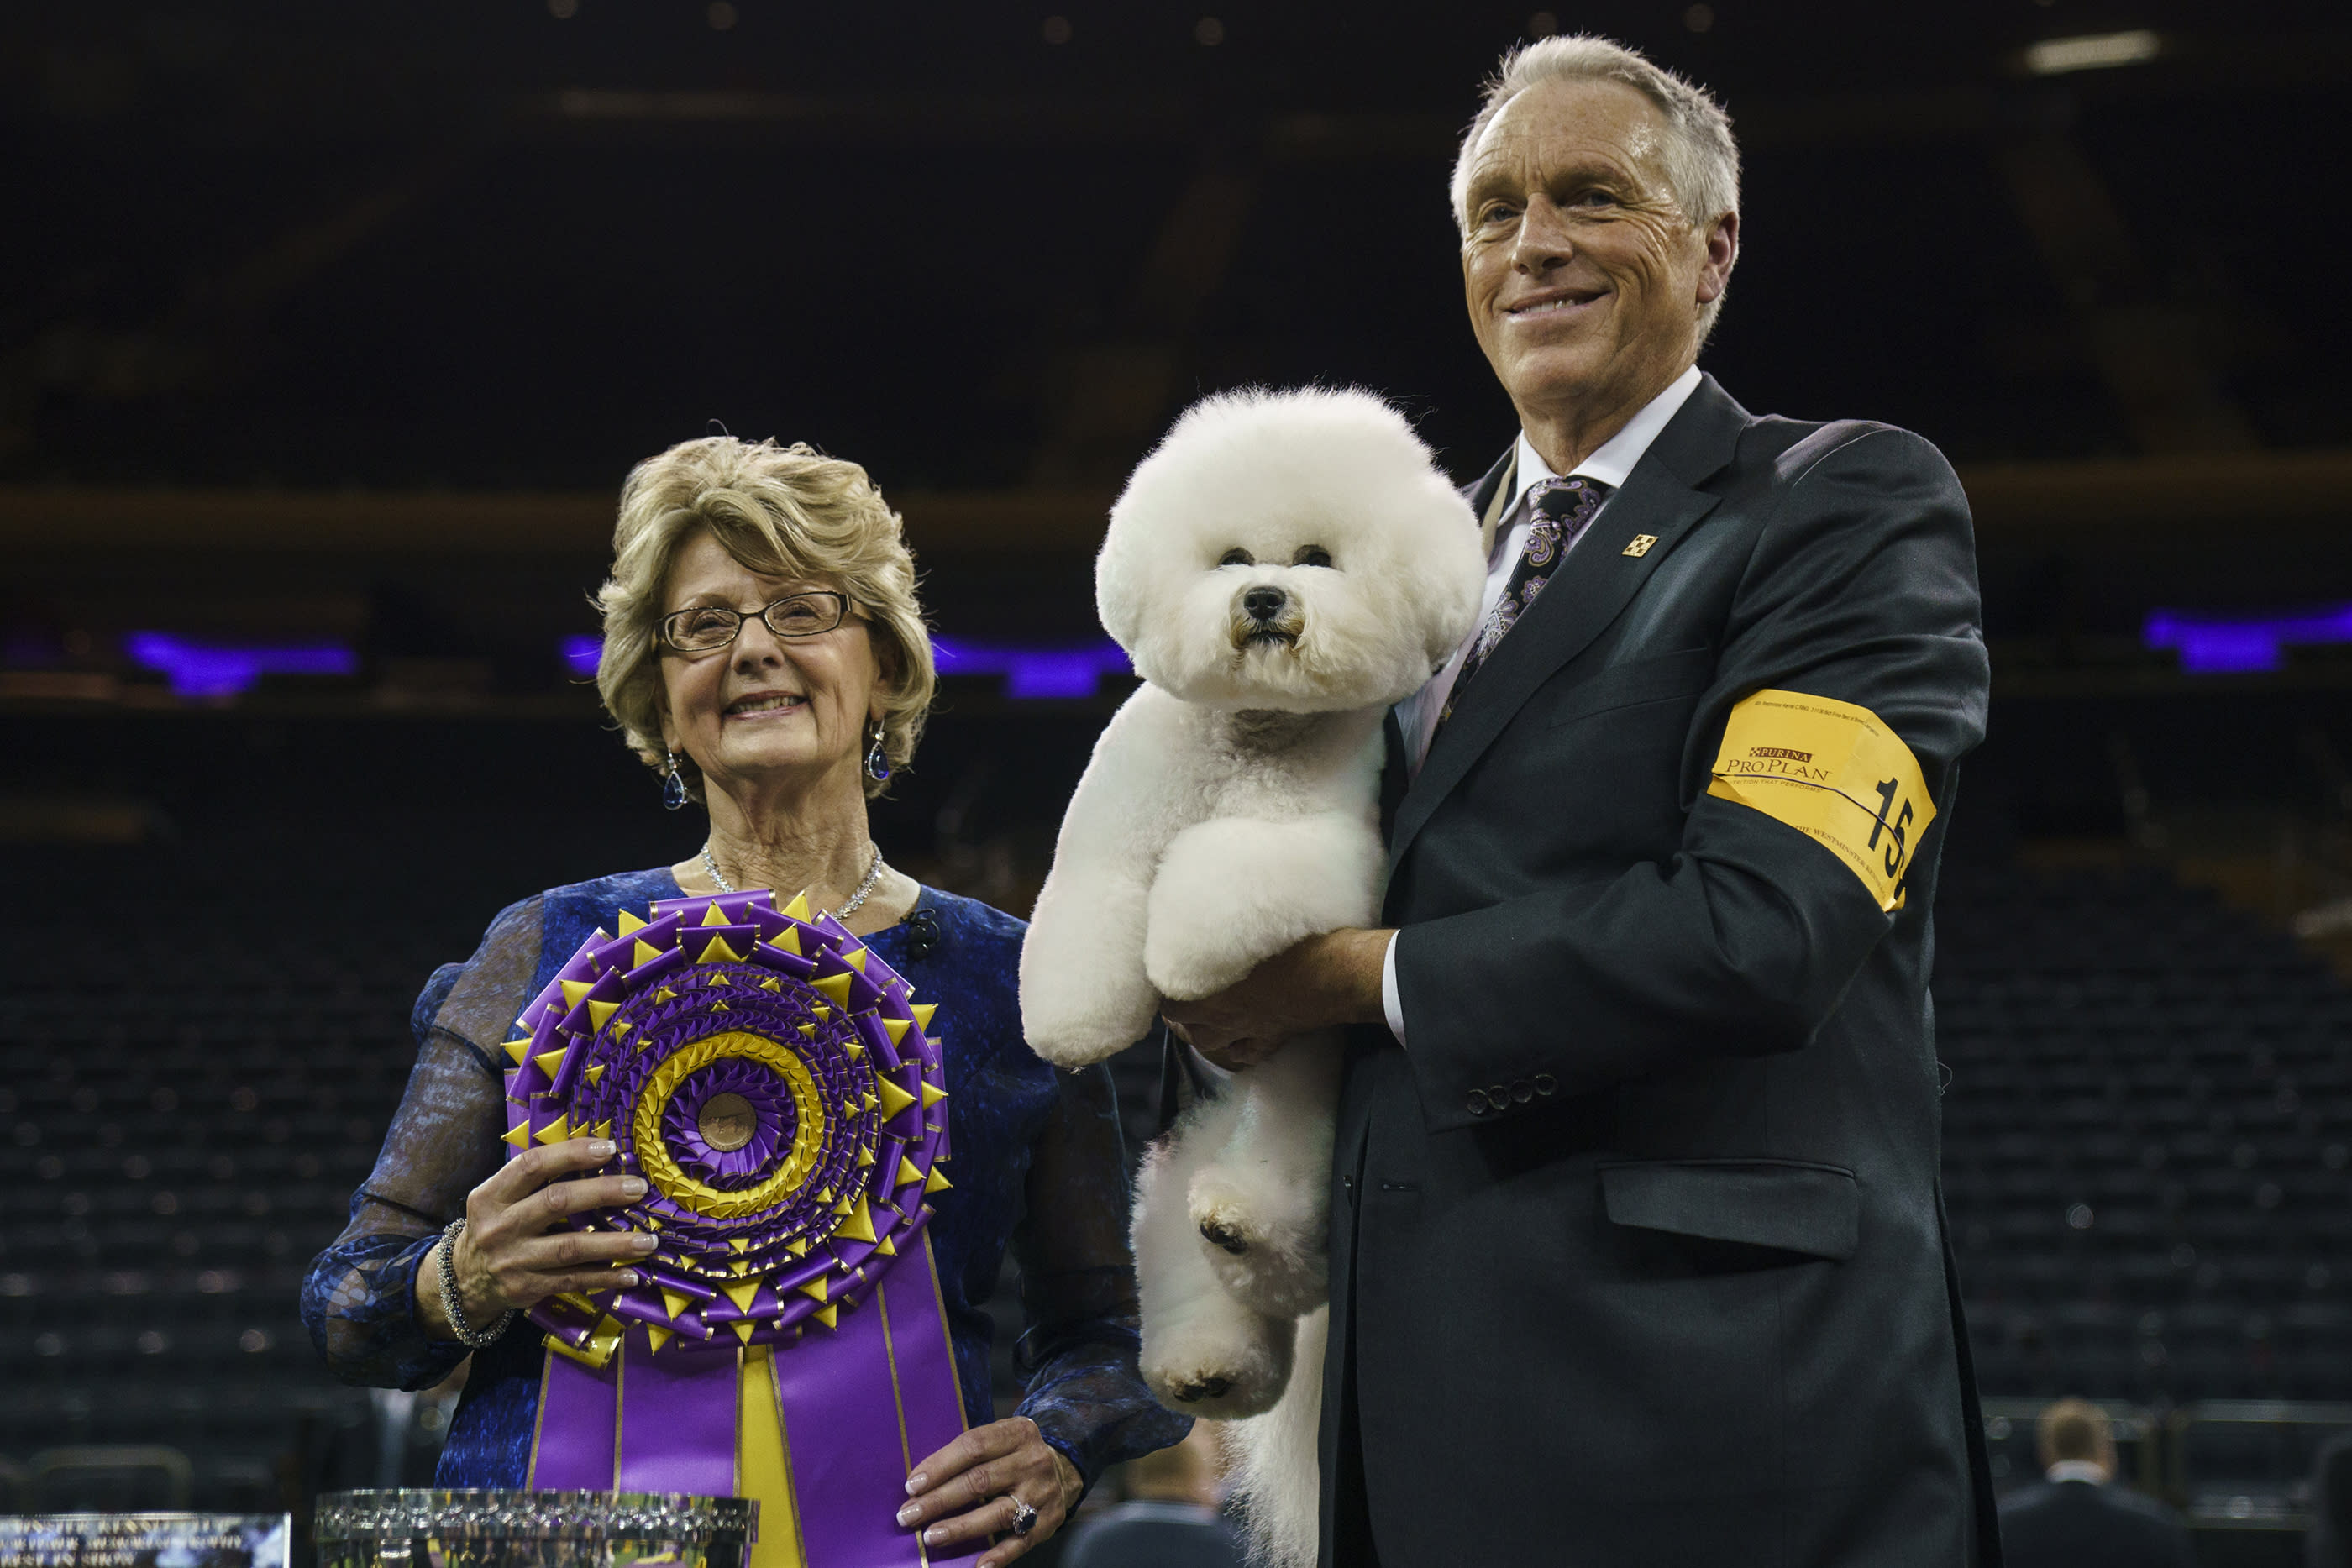 The Westminster Dog Show Winner Gets a Shocking Amount of Prize Money2800 x 1867